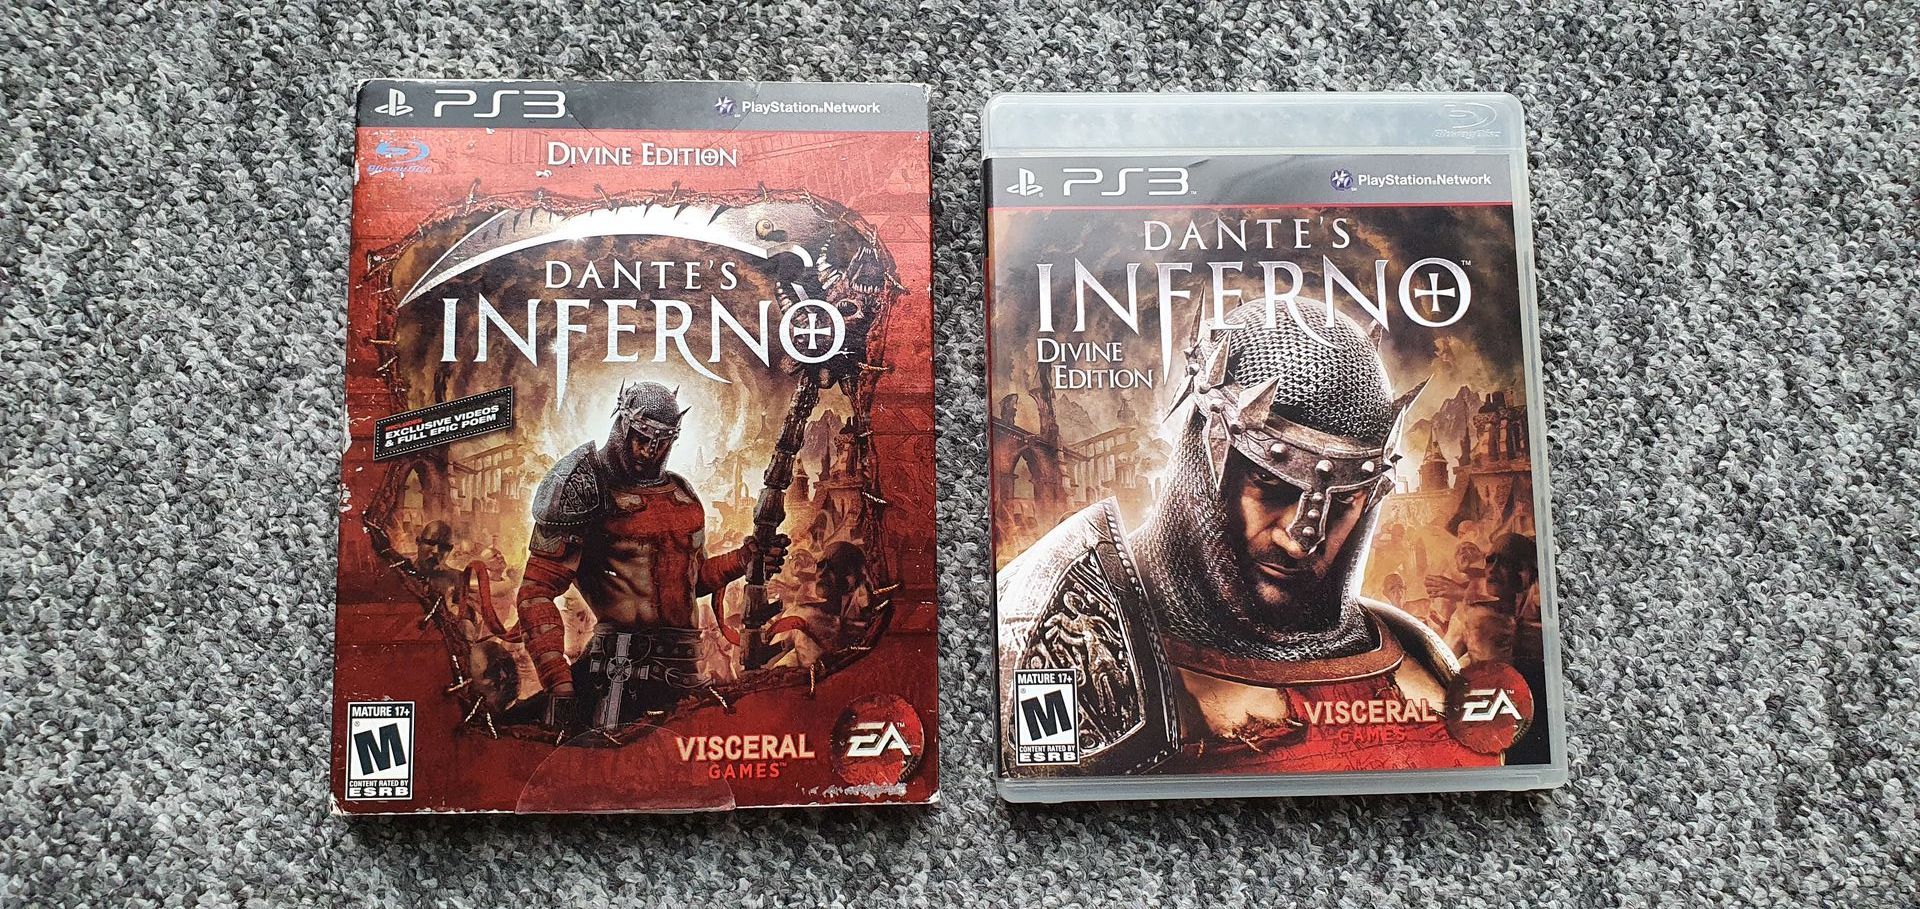 Dante's Inferno [Divine Edition] Prices Playstation 3